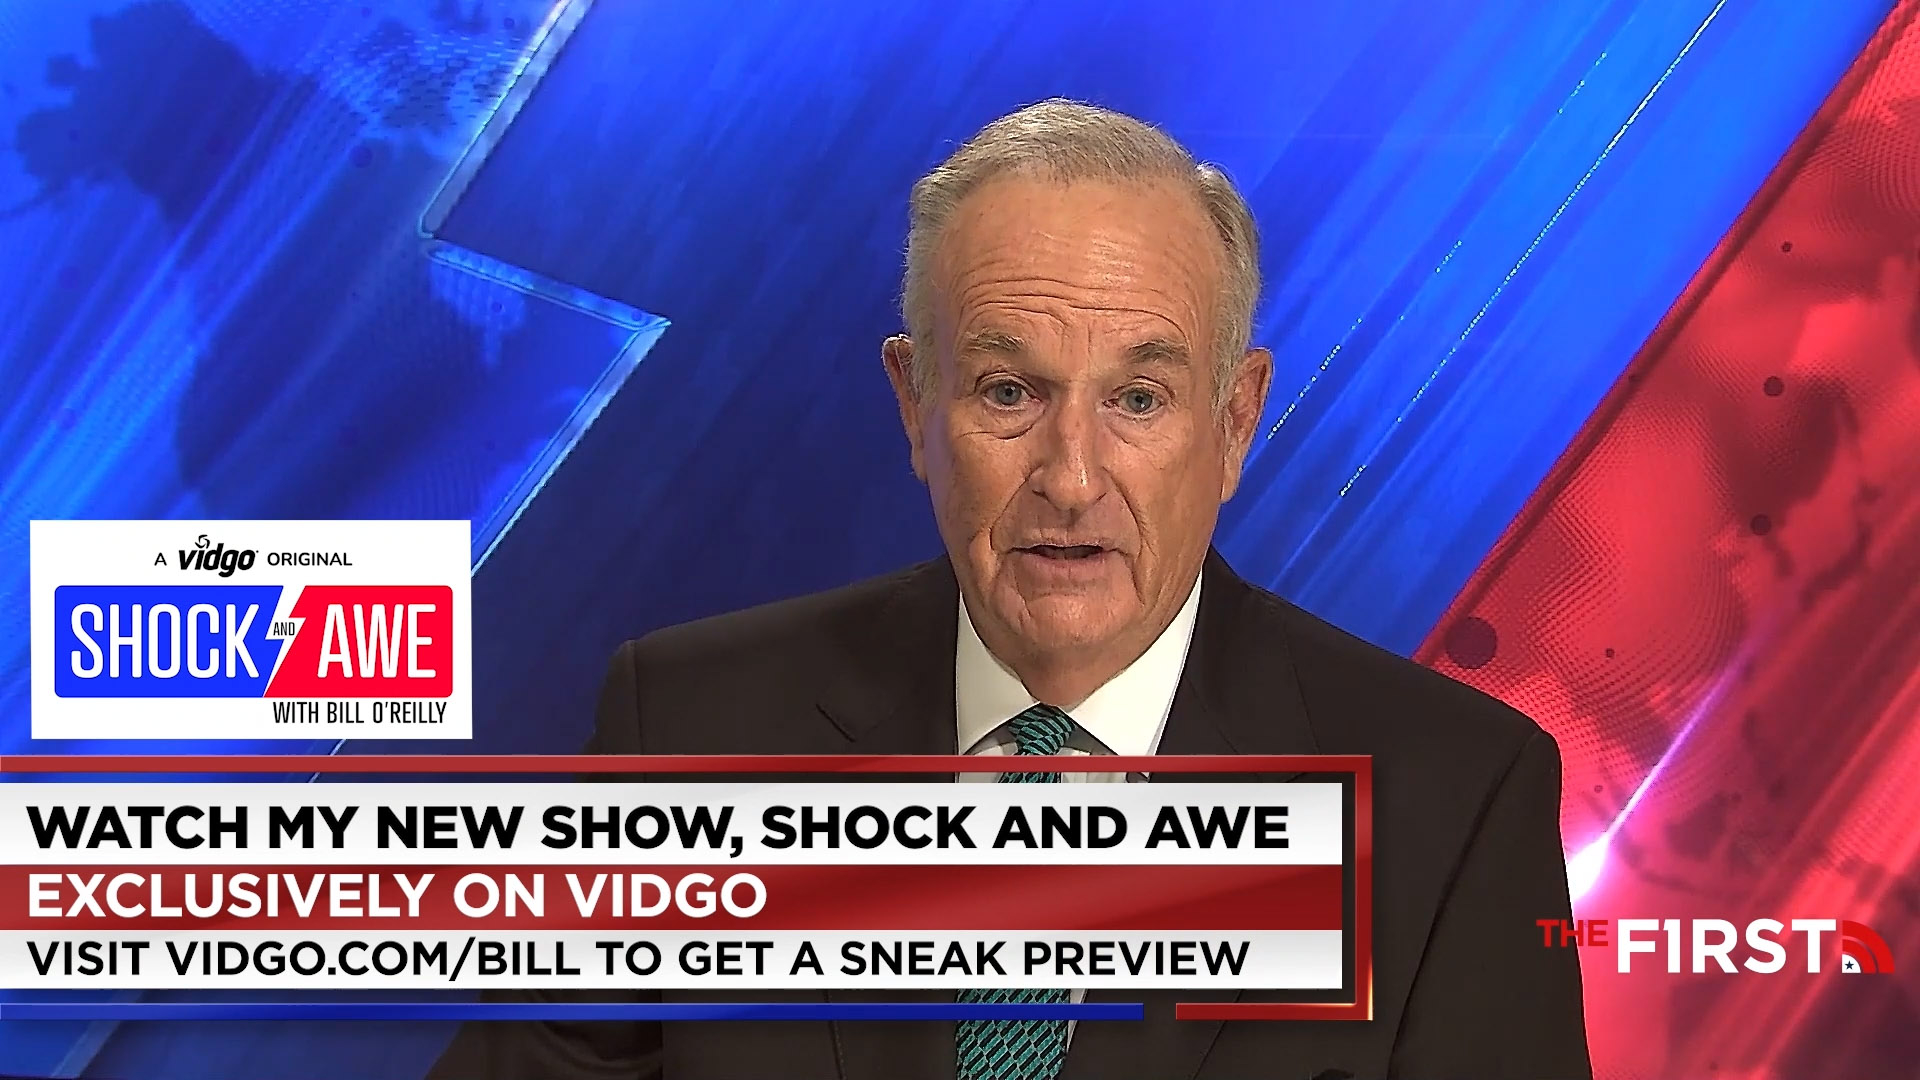 Bill O'Reilly announces his new TV series, Shock and Awe, exclusively on Vidgo.